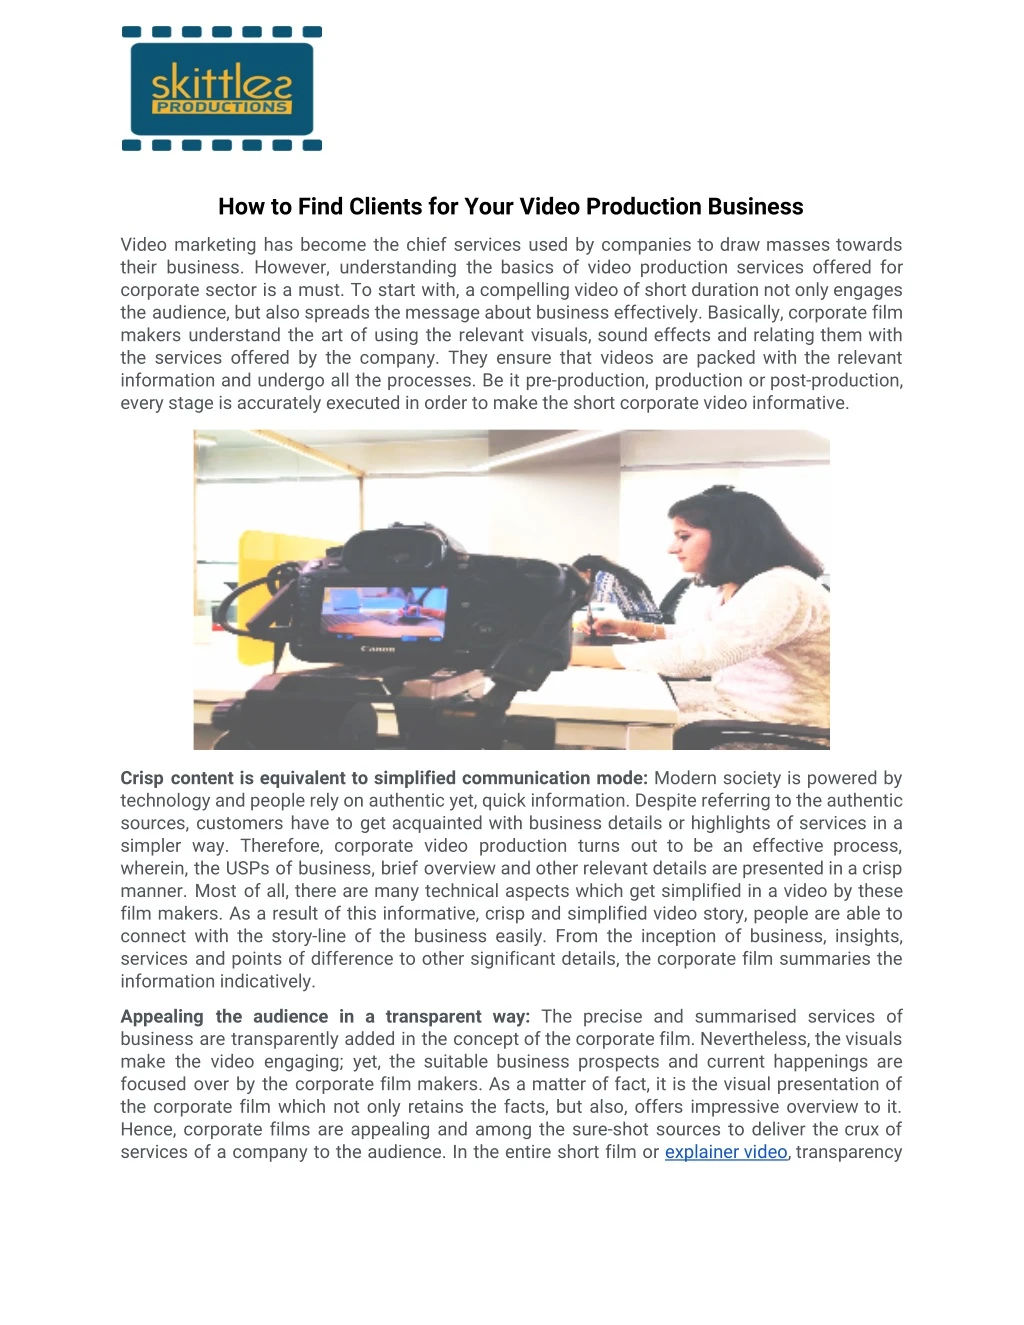 how to find clients for your video production